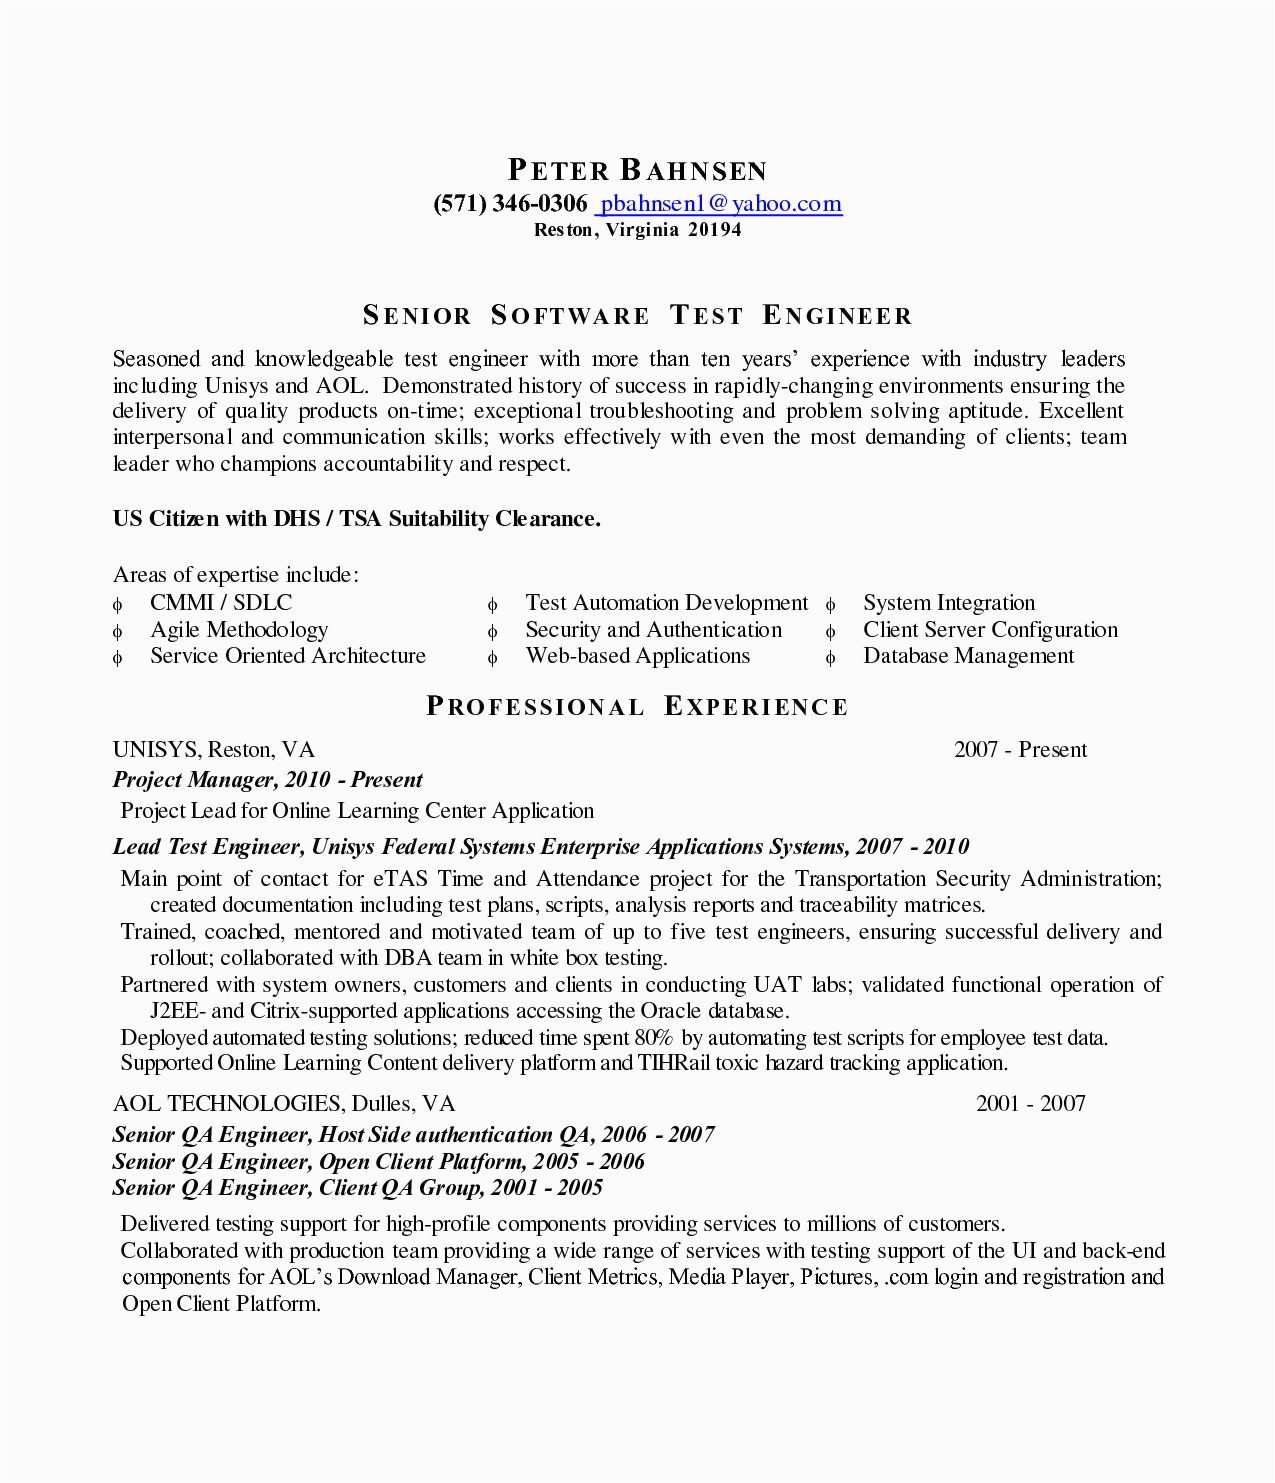 sample resume for software test engineer with experience